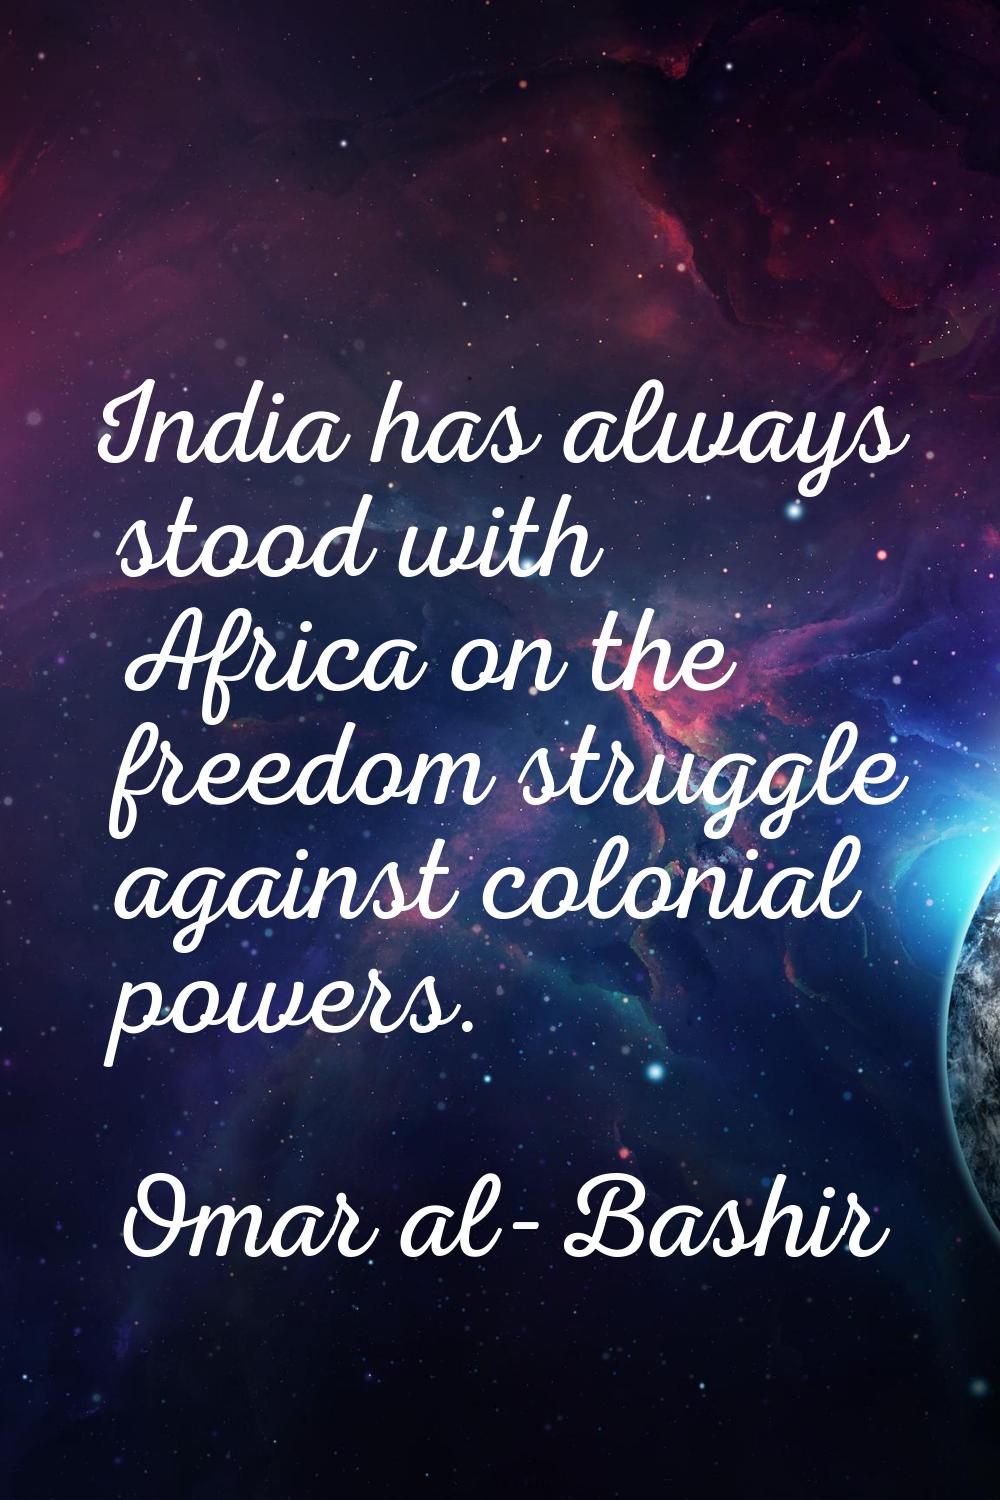 India has always stood with Africa on the freedom struggle against colonial powers.